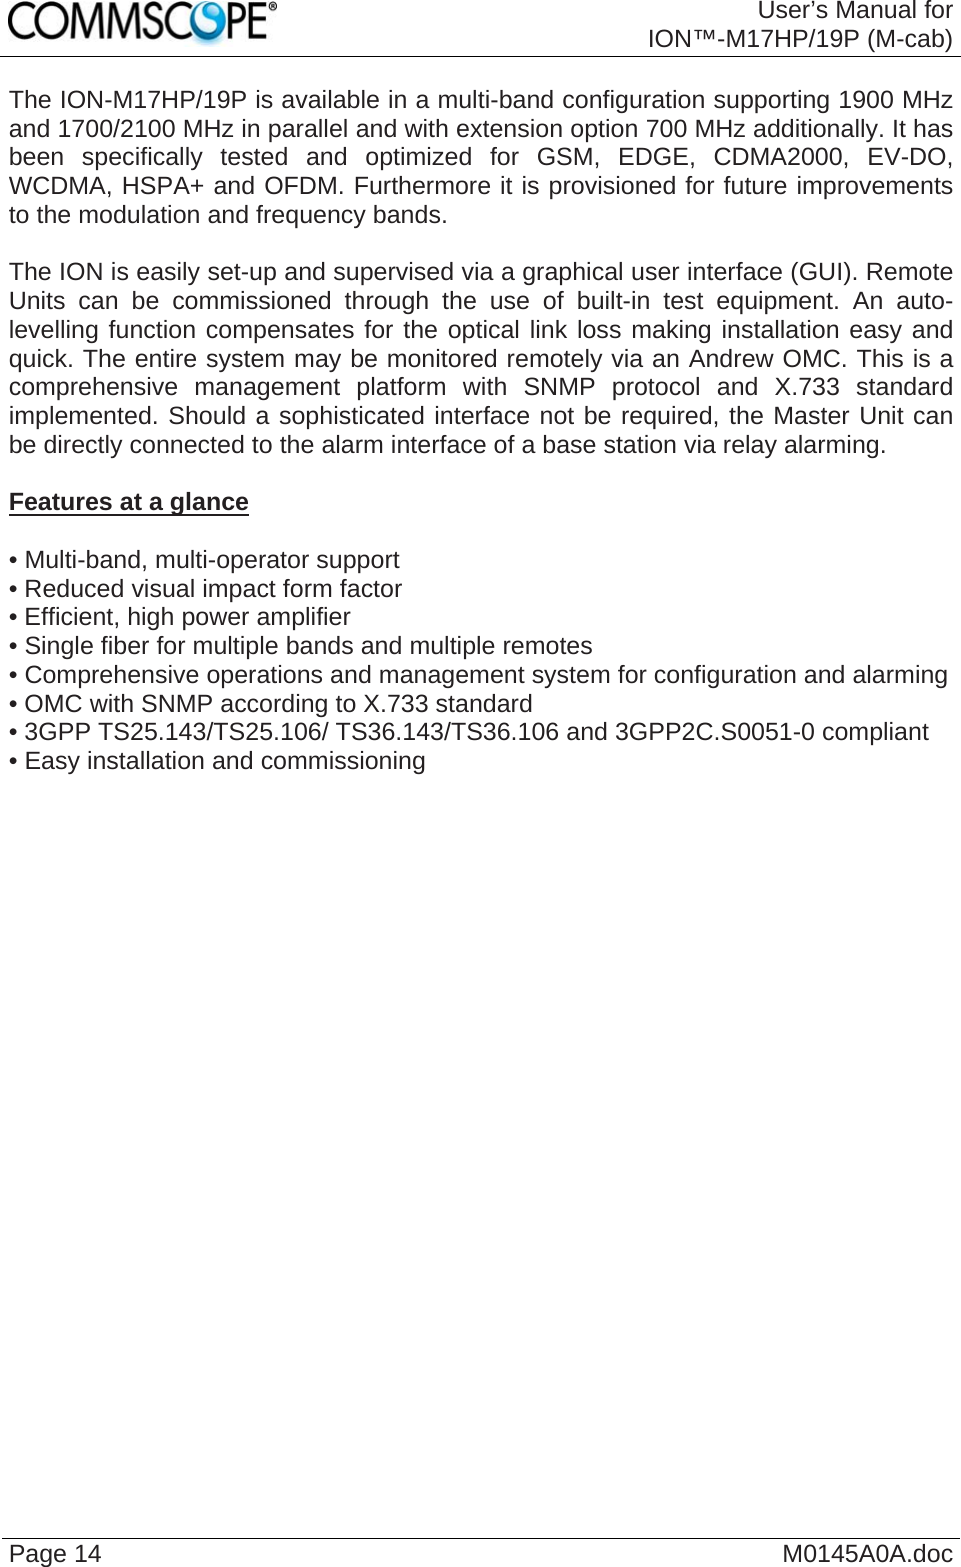  User’s Manual forION™-M17HP/19P (M-cab) Page 14  M0145A0A.doc The ION-M17HP/19P is available in a multi-band configuration supporting 1900 MHz and 1700/2100 MHz in parallel and with extension option 700 MHz additionally. It has been specifically tested and optimized for GSM, EDGE, CDMA2000, EV-DO, WCDMA, HSPA+ and OFDM. Furthermore it is provisioned for future improvements to the modulation and frequency bands.  The ION is easily set-up and supervised via a graphical user interface (GUI). Remote Units can be commissioned through the use of built-in test equipment. An auto-levelling function compensates for the optical link loss making installation easy and quick. The entire system may be monitored remotely via an Andrew OMC. This is a comprehensive management platform with SNMP protocol and X.733 standard implemented. Should a sophisticated interface not be required, the Master Unit can be directly connected to the alarm interface of a base station via relay alarming.  Features at a glance  • Multi-band, multi-operator support • Reduced visual impact form factor • Efficient, high power amplifier • Single fiber for multiple bands and multiple remotes • Comprehensive operations and management system for configuration and alarming • OMC with SNMP according to X.733 standard • 3GPP TS25.143/TS25.106/ TS36.143/TS36.106 and 3GPP2C.S0051-0 compliant • Easy installation and commissioning  